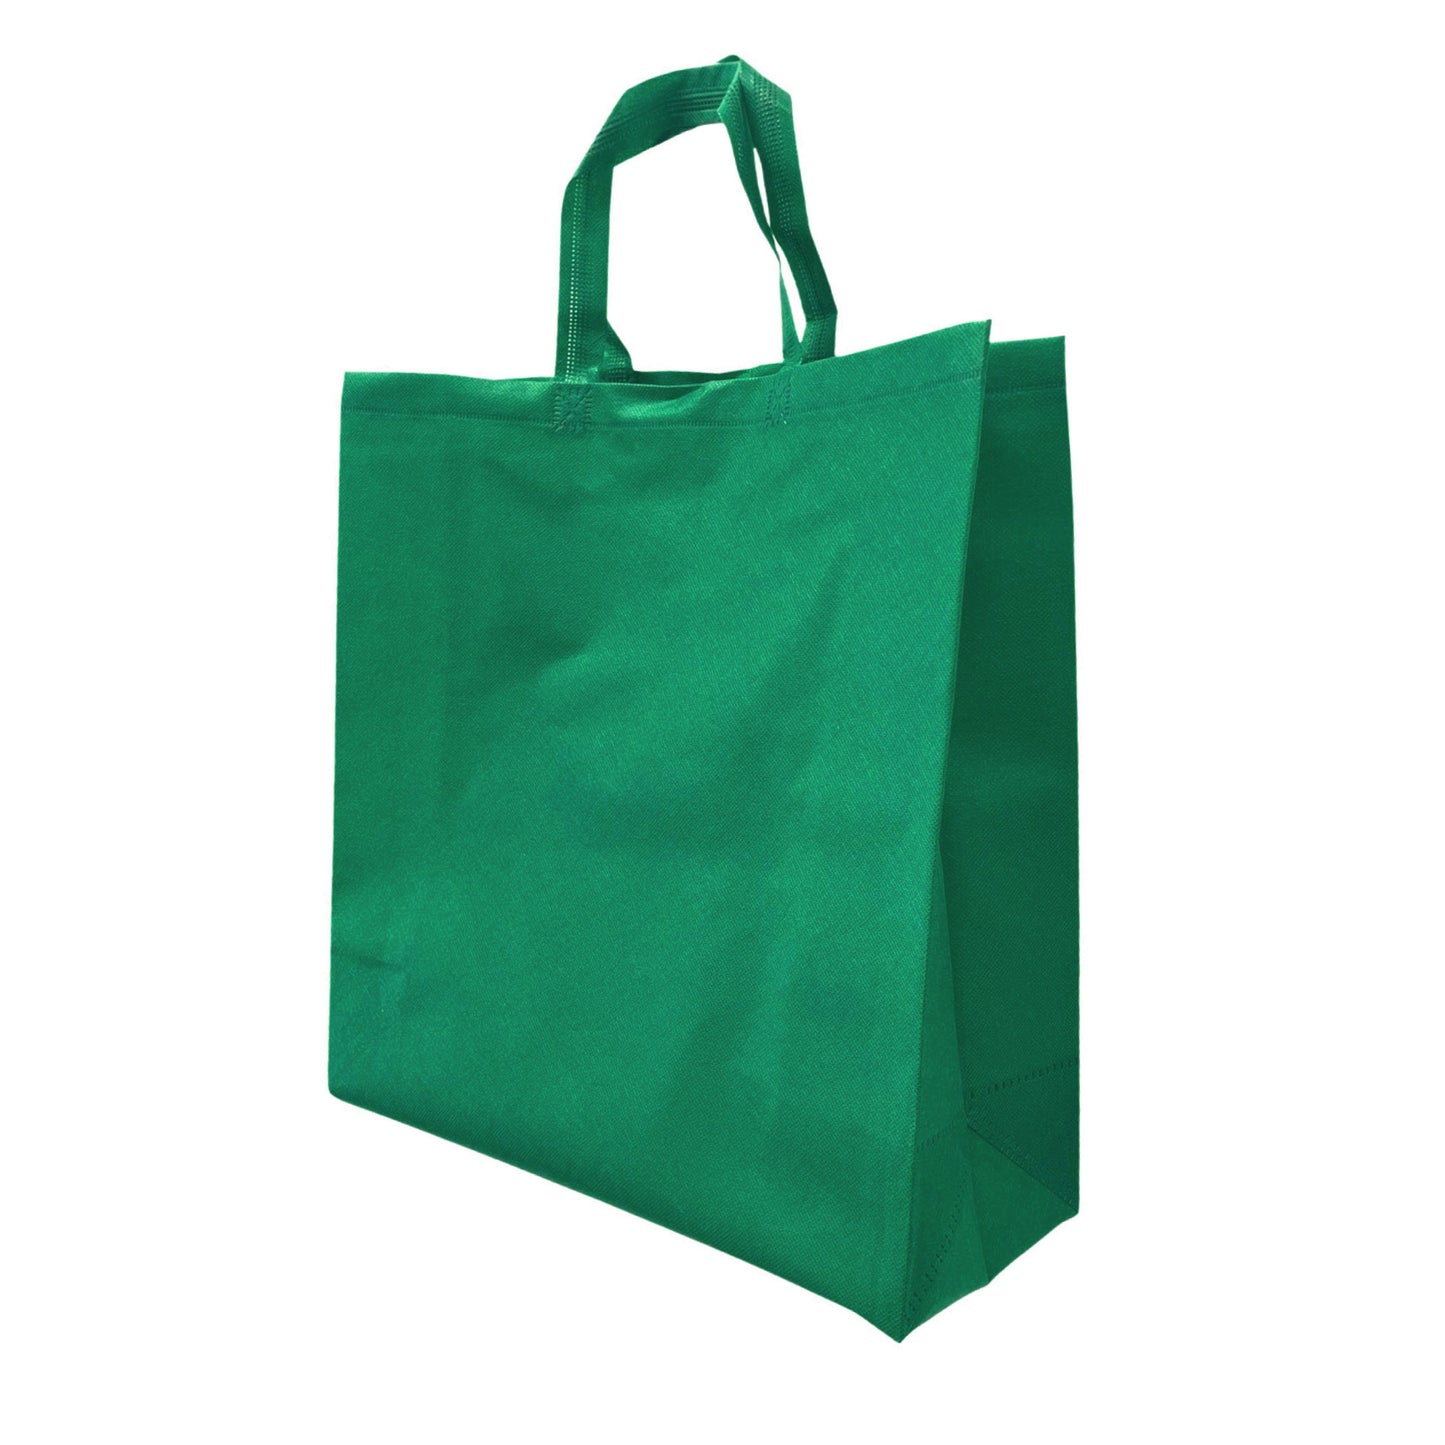 200pcs, Grocer, 15.5x6x15.5 inches, Dark Green Non-Woven Reusable Shopping Bags, with Flat Handles